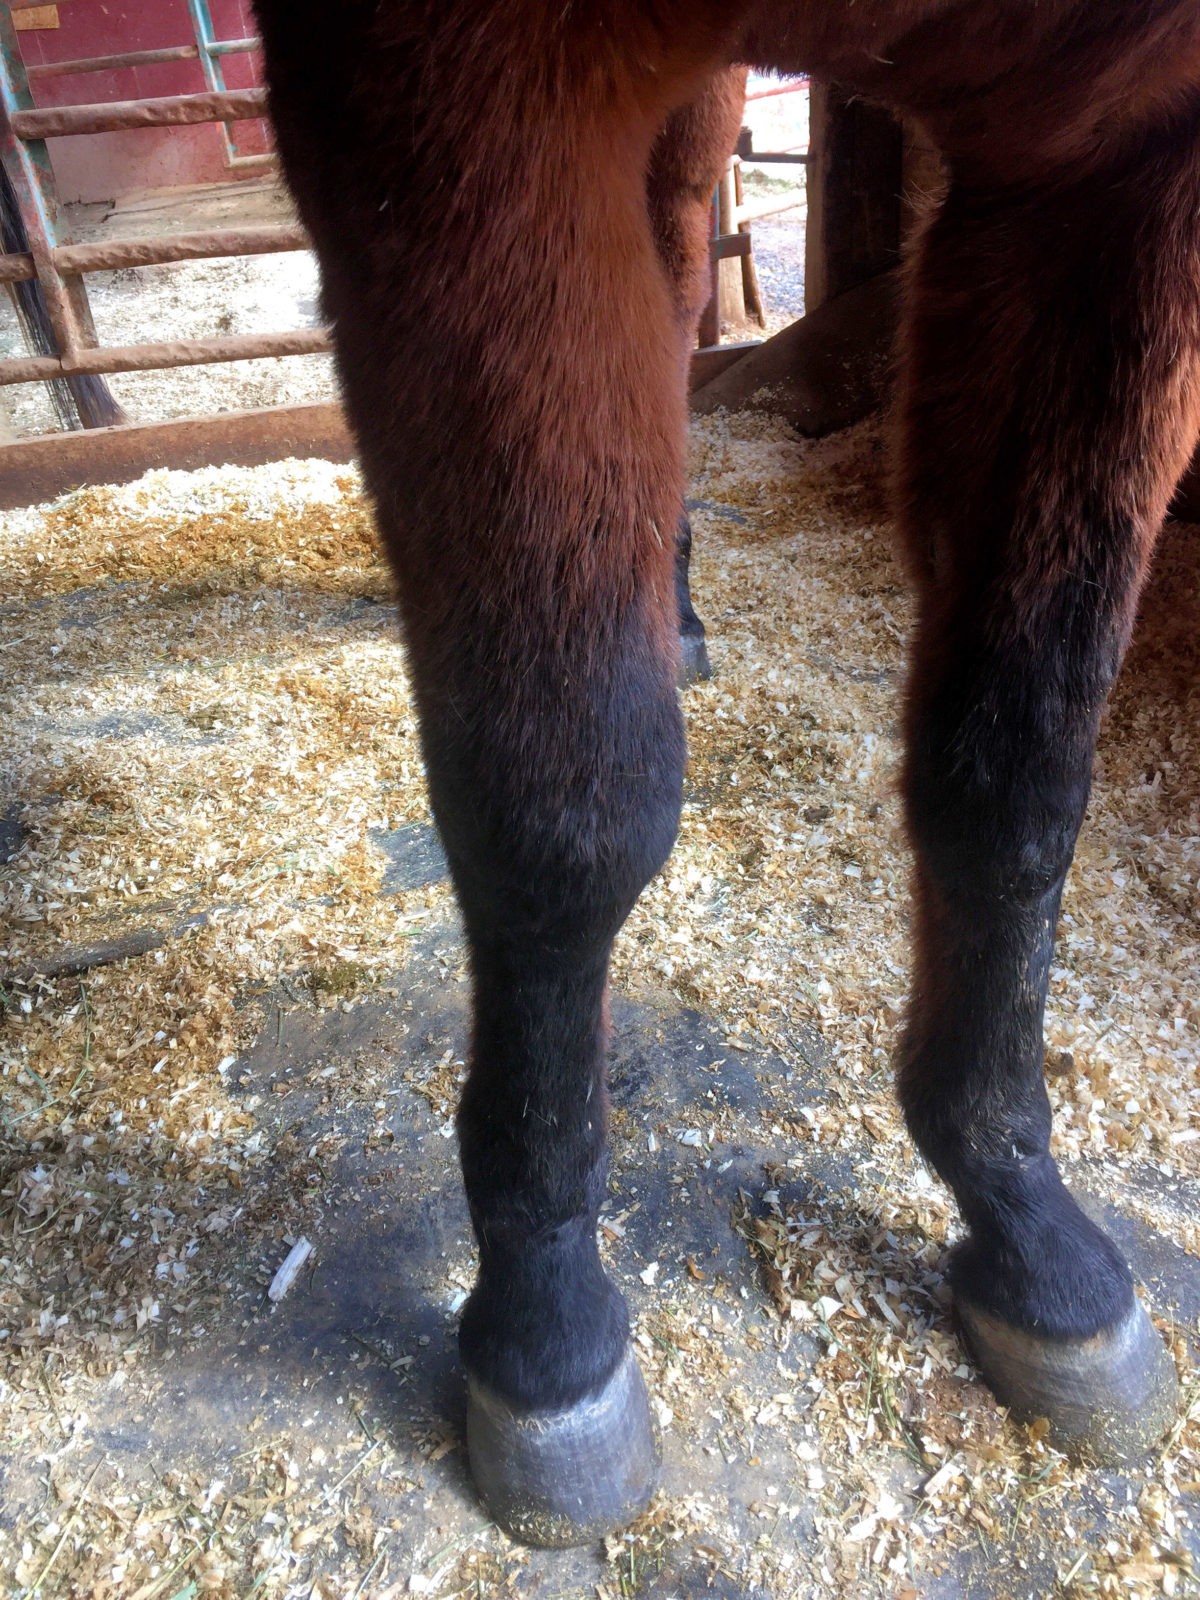 Rockley Farm: Paddy - long toes, high heels and cracks - comparison photos